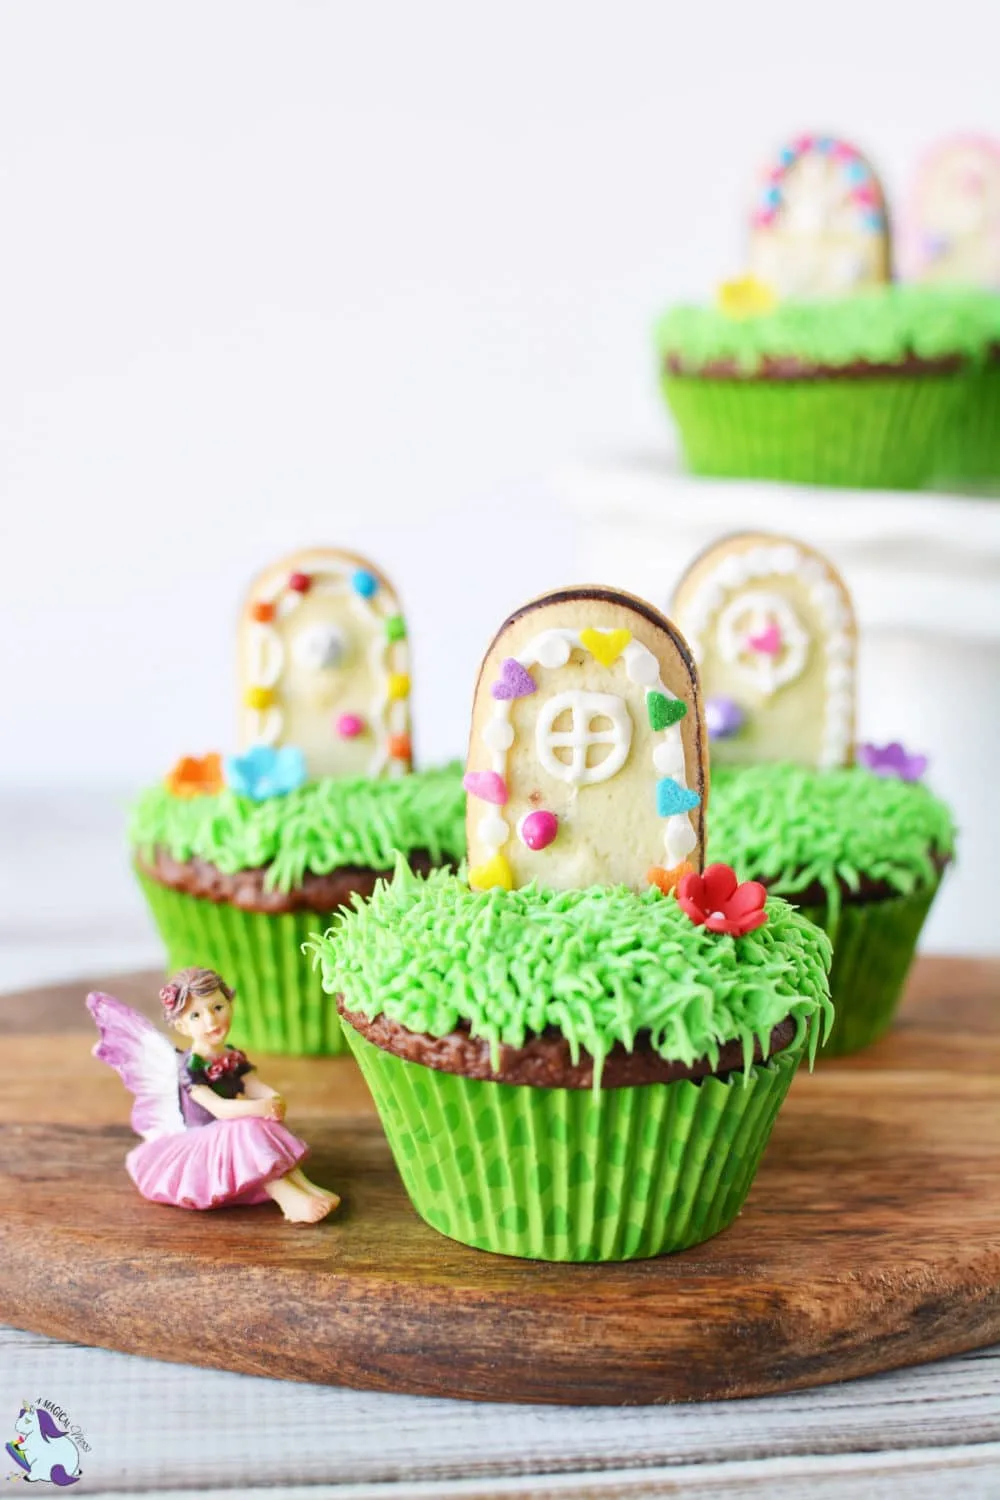 Cupcakes with green frosting and cookies decorated as doors. There is a fairy figuring sitting next to the 3 cupcakes on a cutting board. 